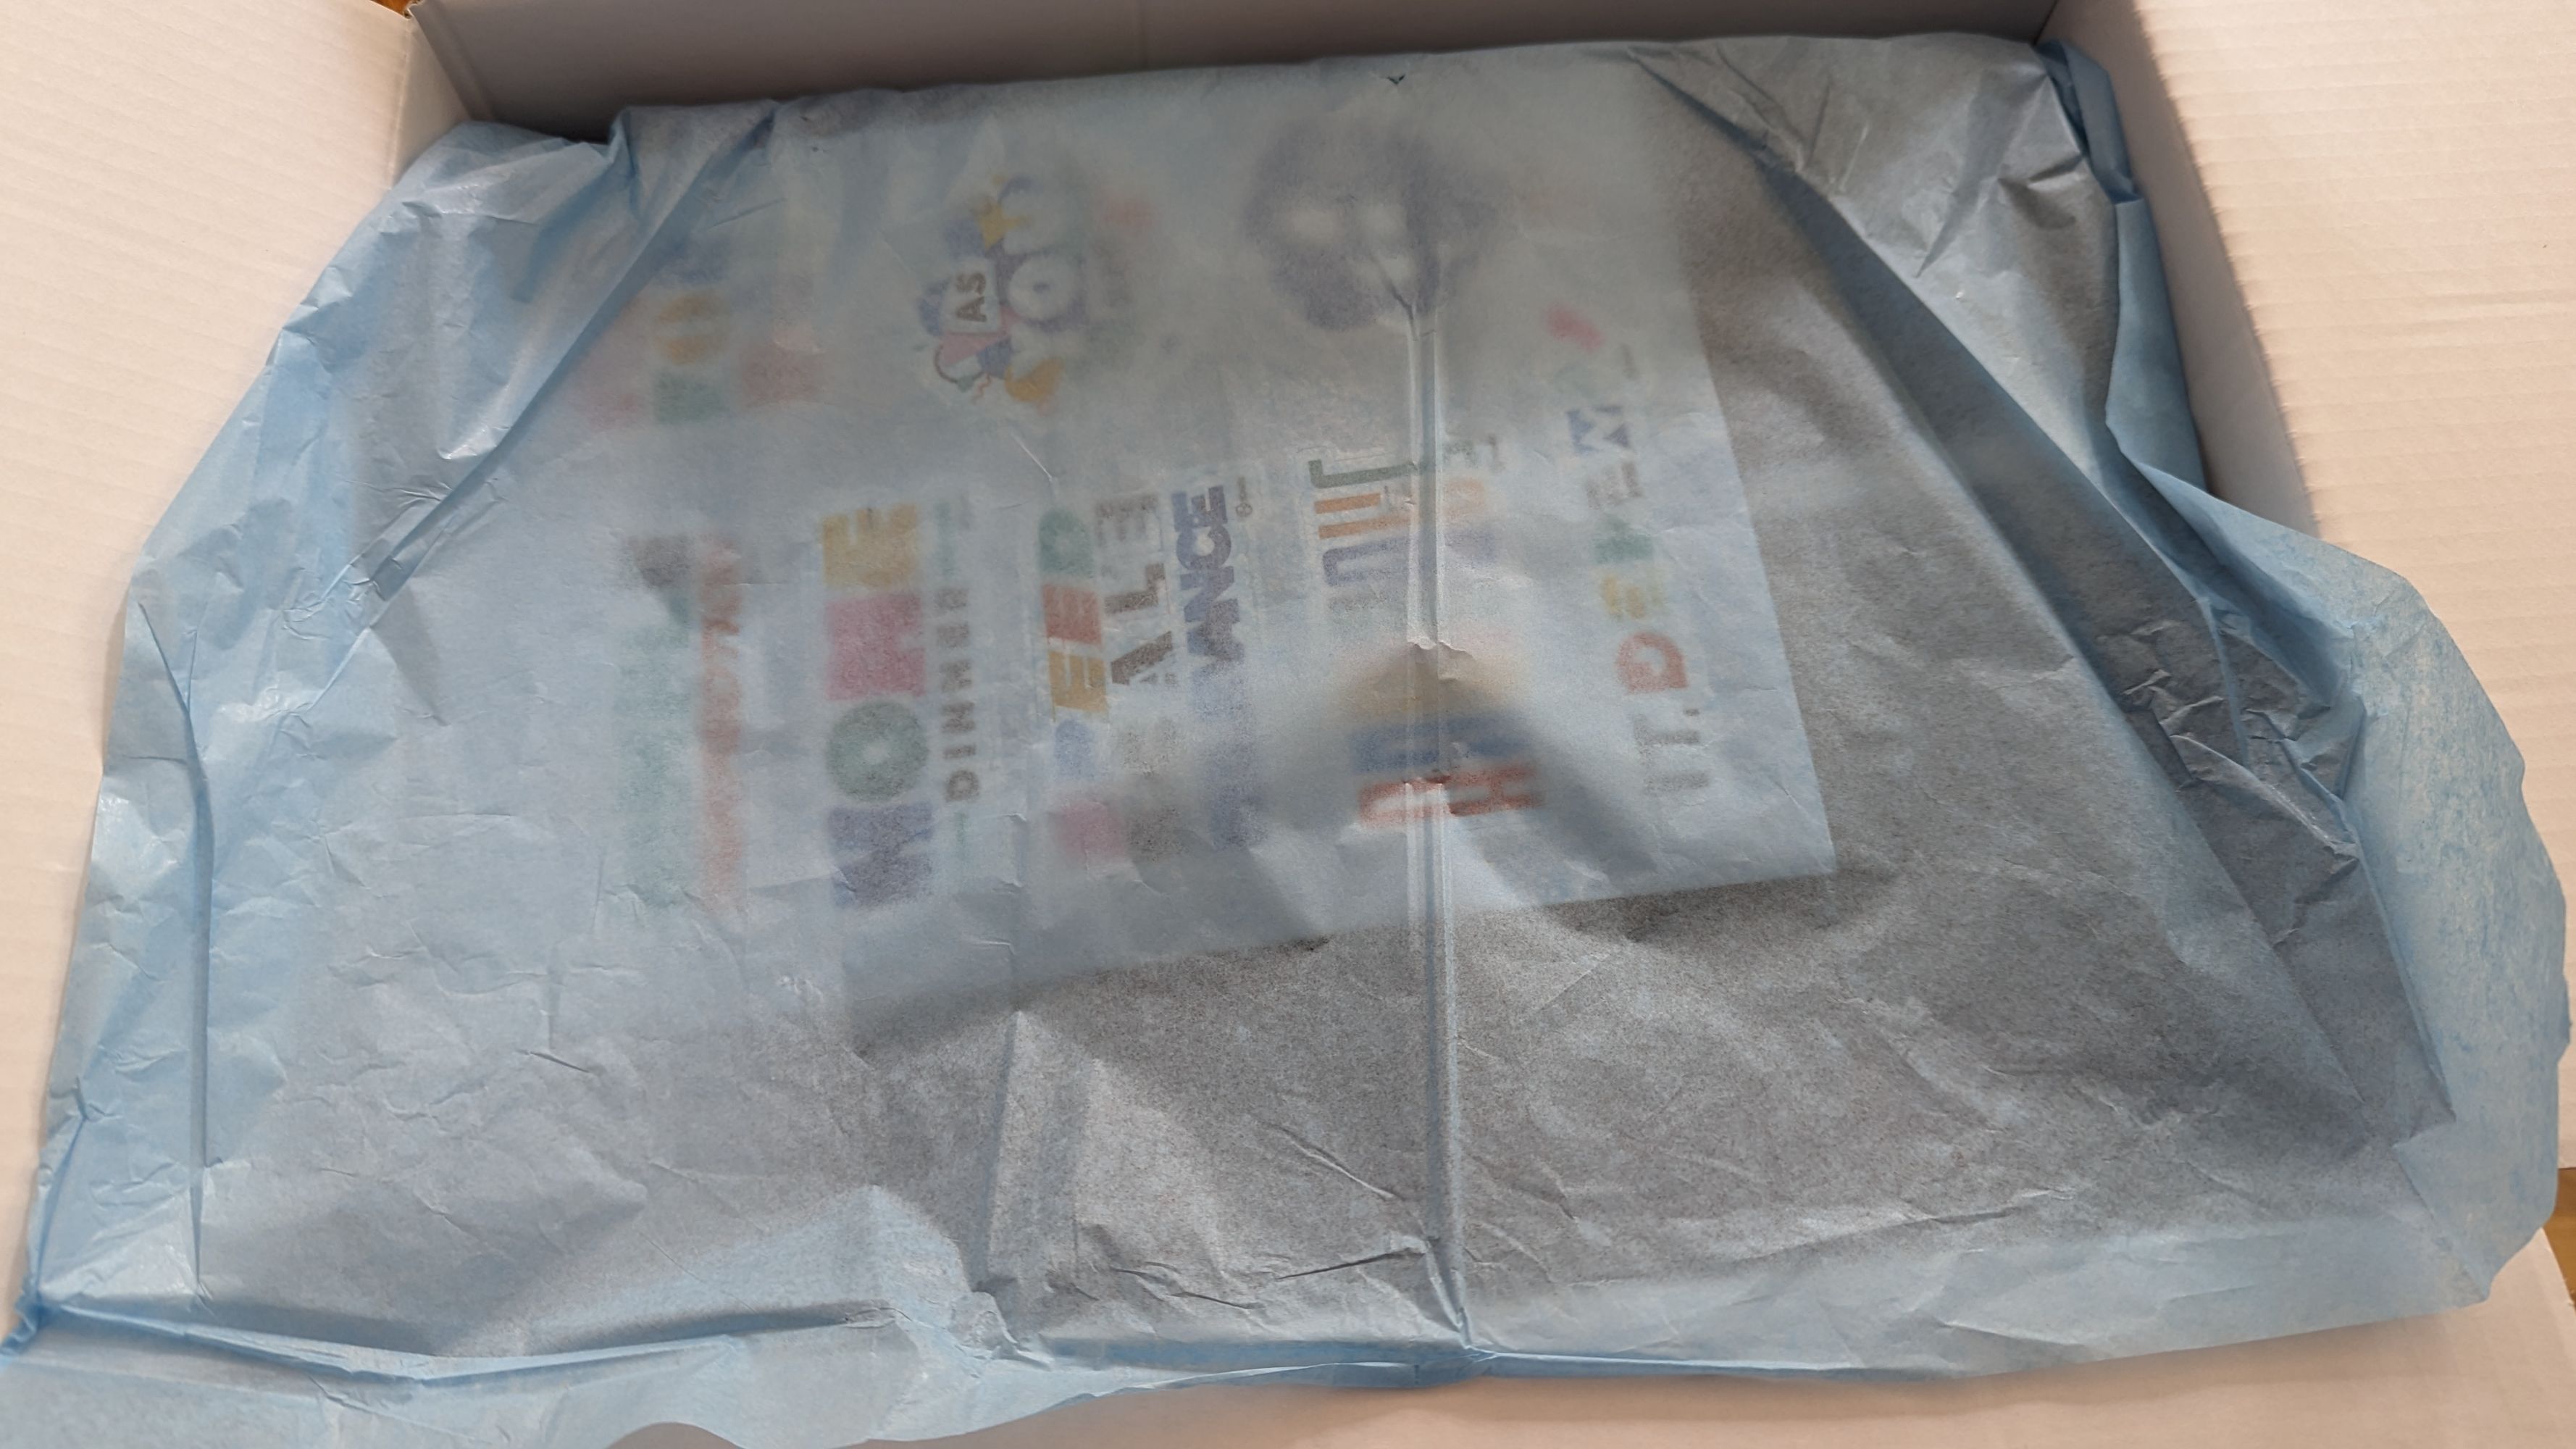 A box of swag, covered with a light blue piece of tissue paper, teasingly not quite showing what is in the box